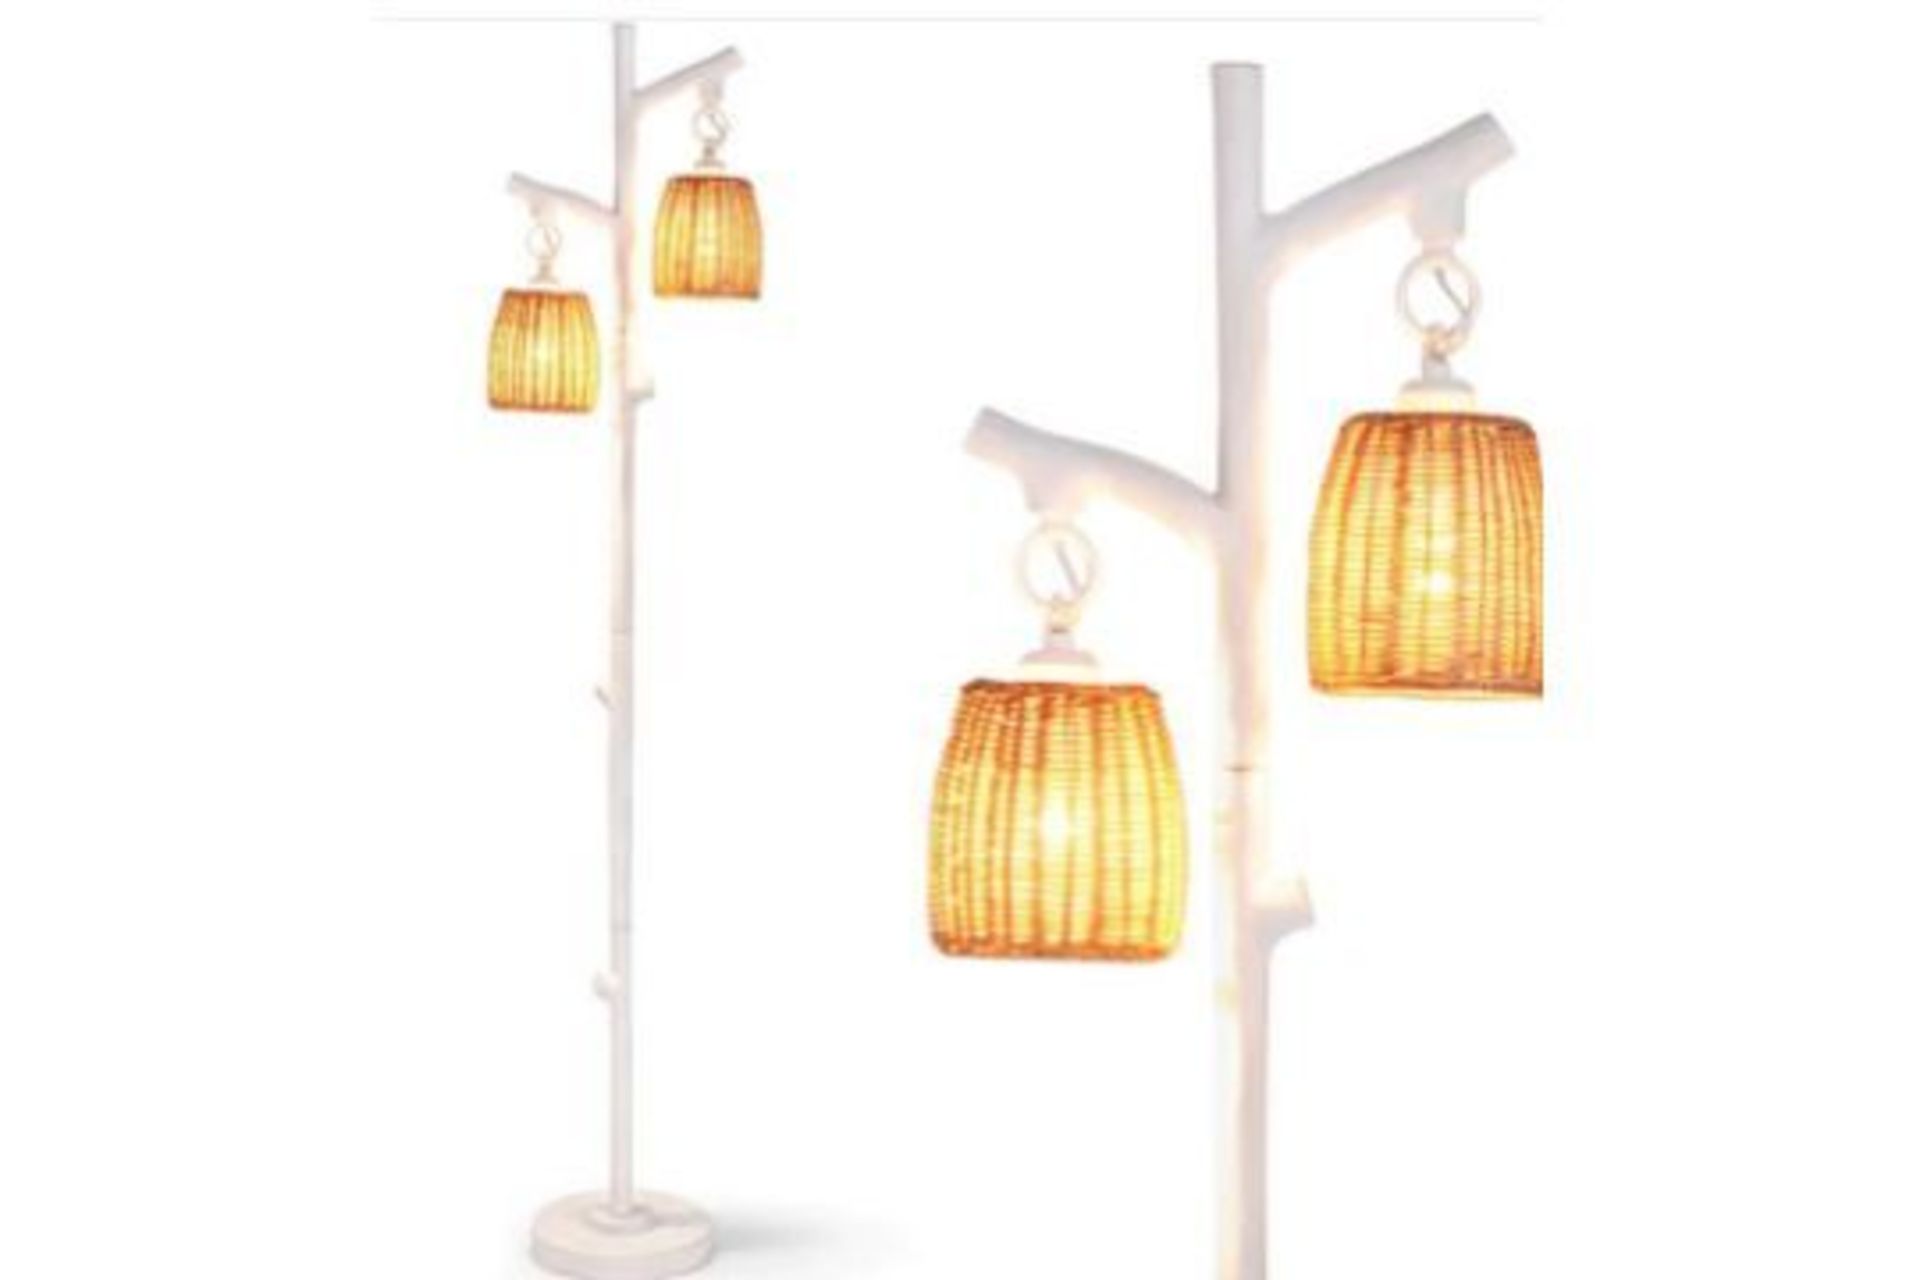 2 DIMMABLE LIGHT FARMHOUSE FLOOR LAMP WITH FOOT SWITCH WITH RATTAN STYLE-WHITE. - ER53. Designed